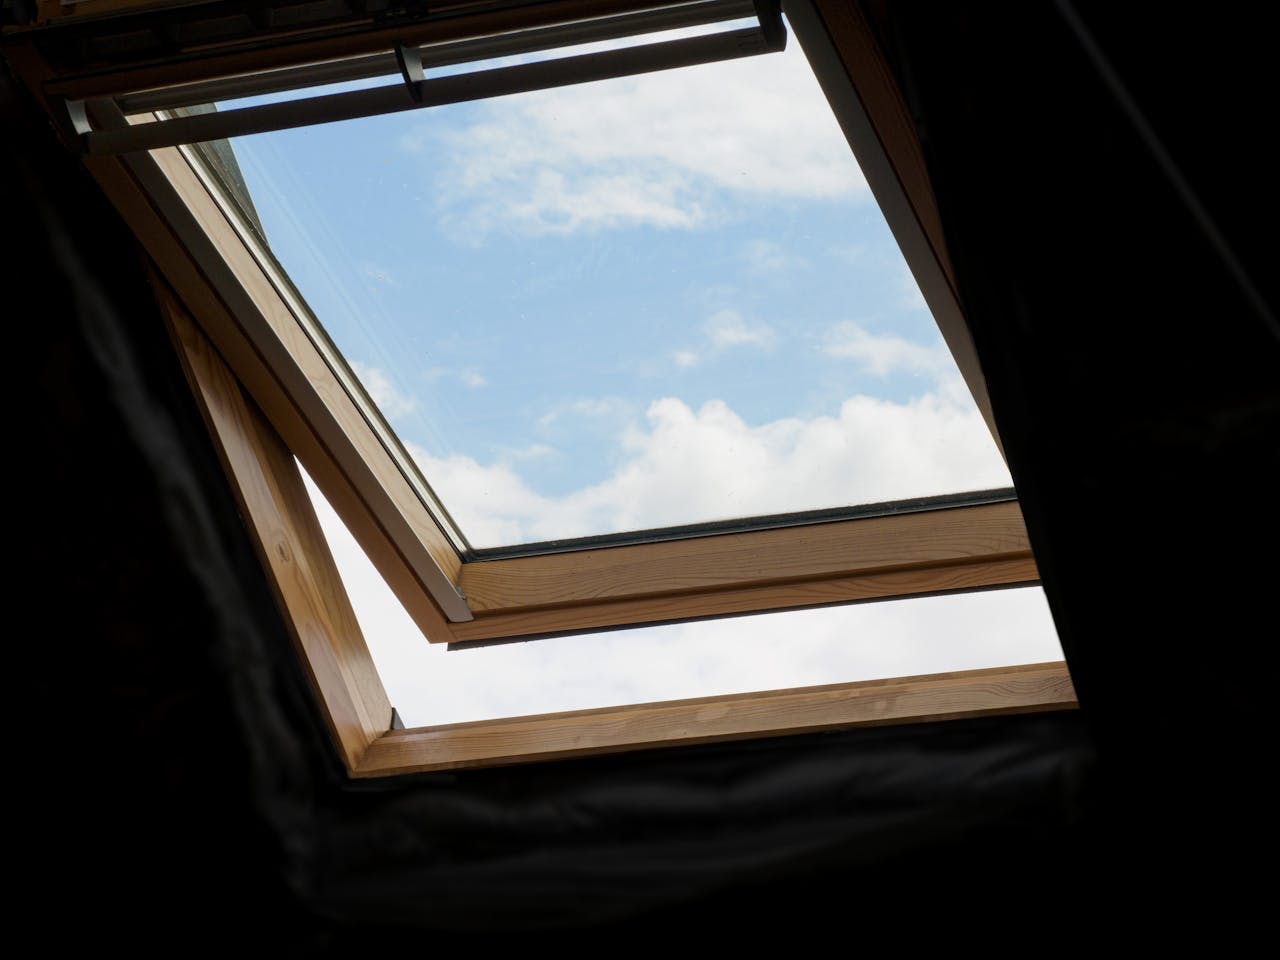 Cooling-opening skylights